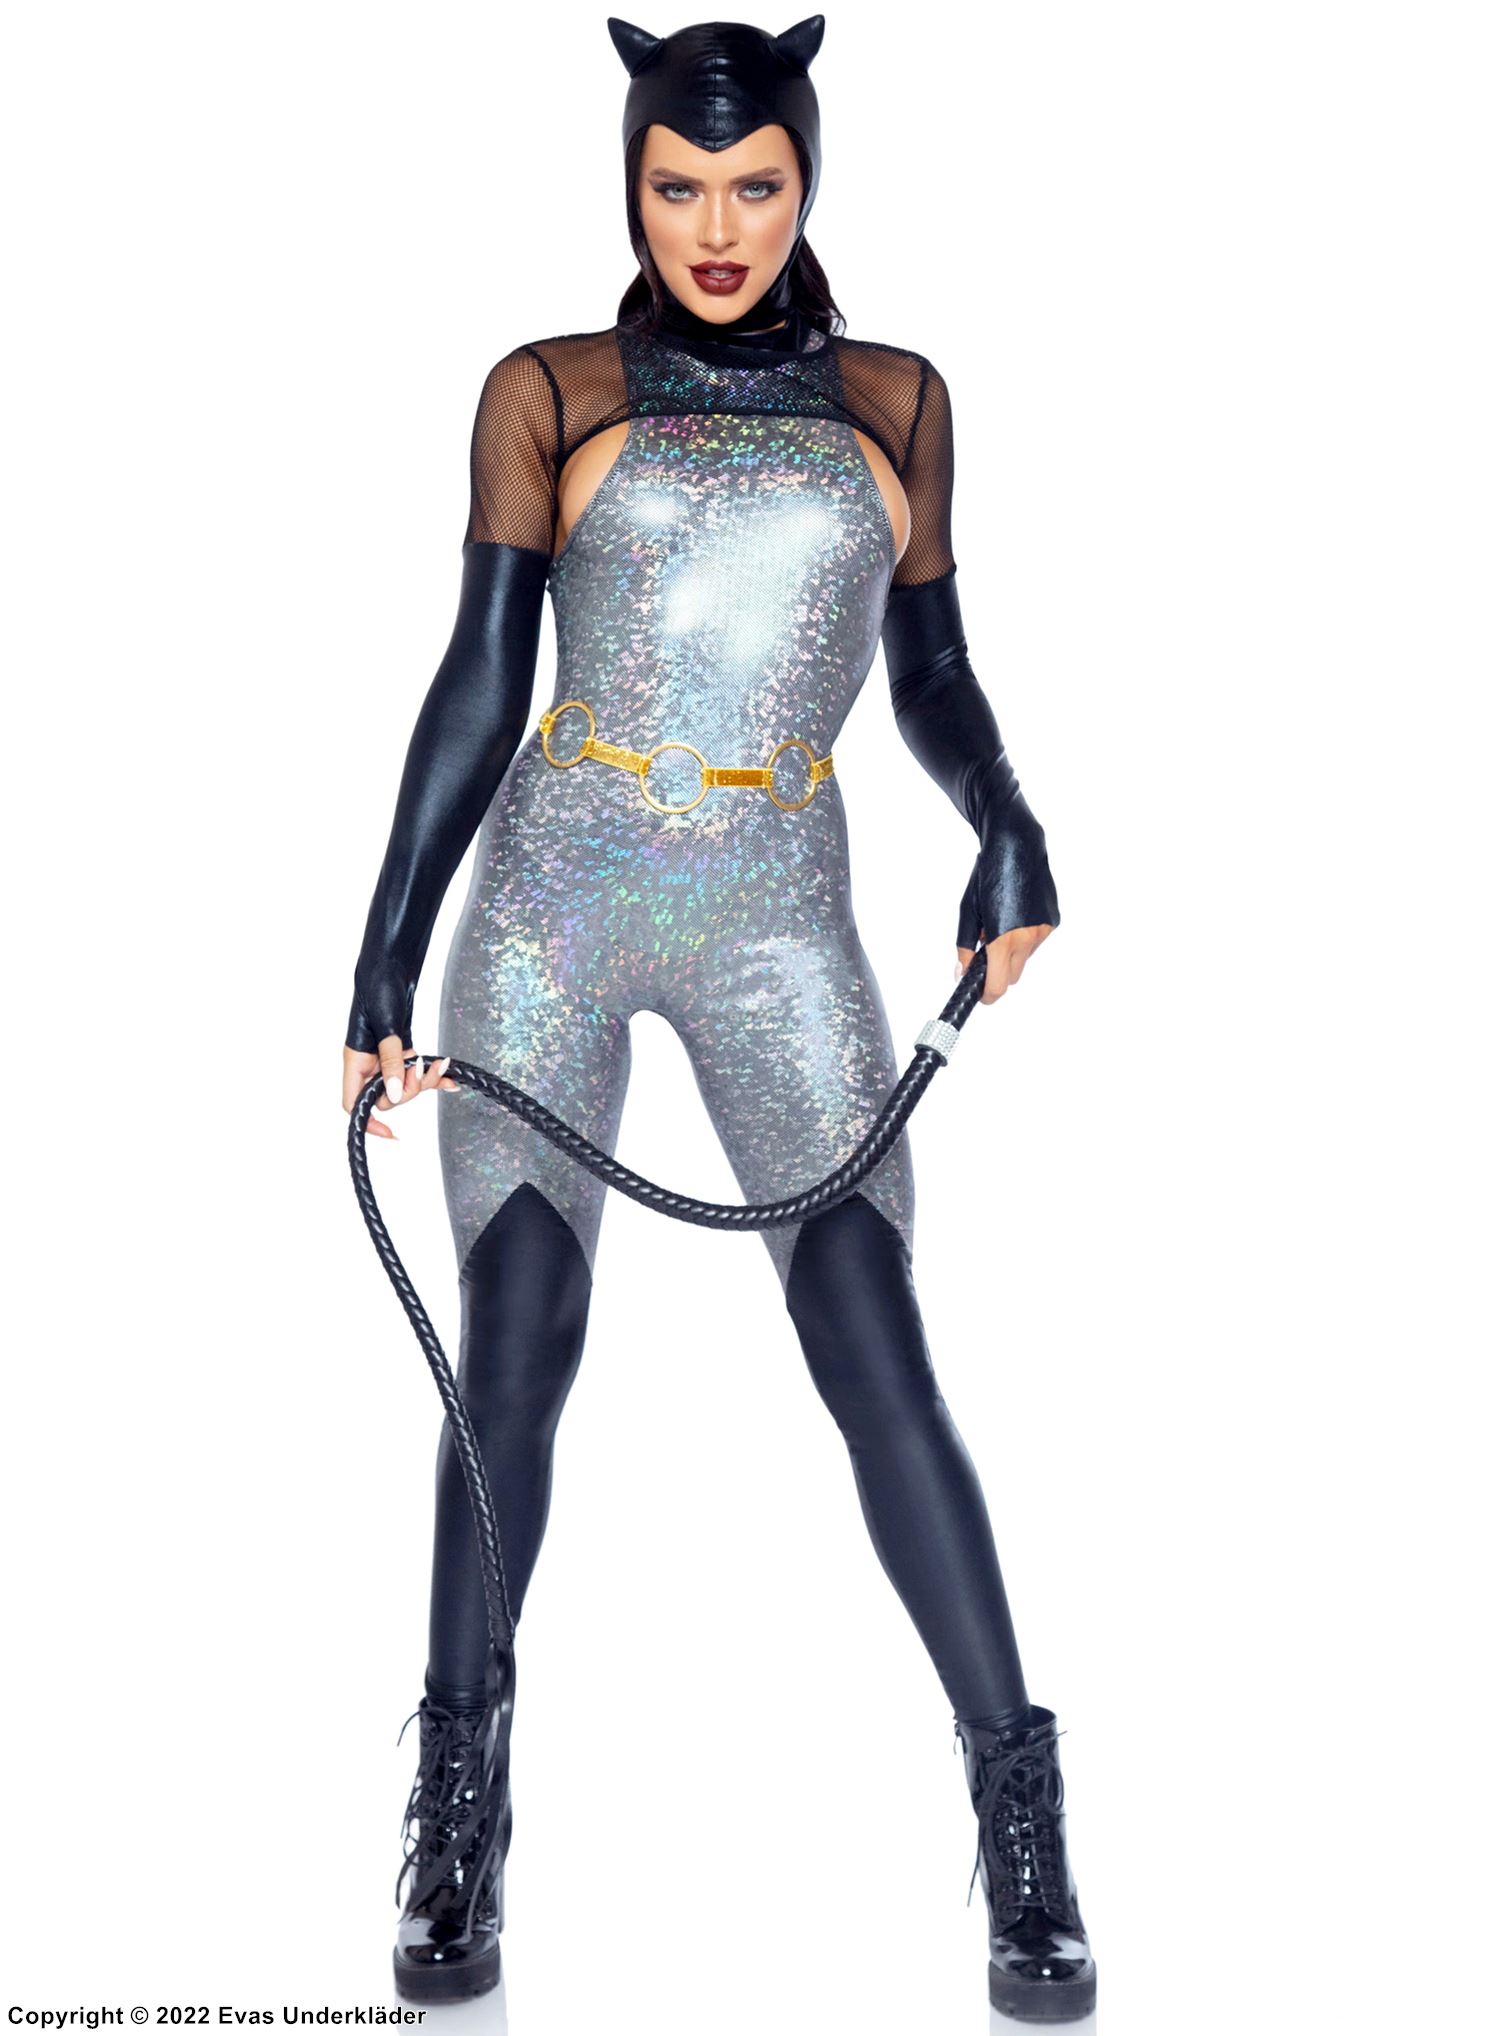 Costume catsuit, small fishnet, wet look, iridescent fabric, rings